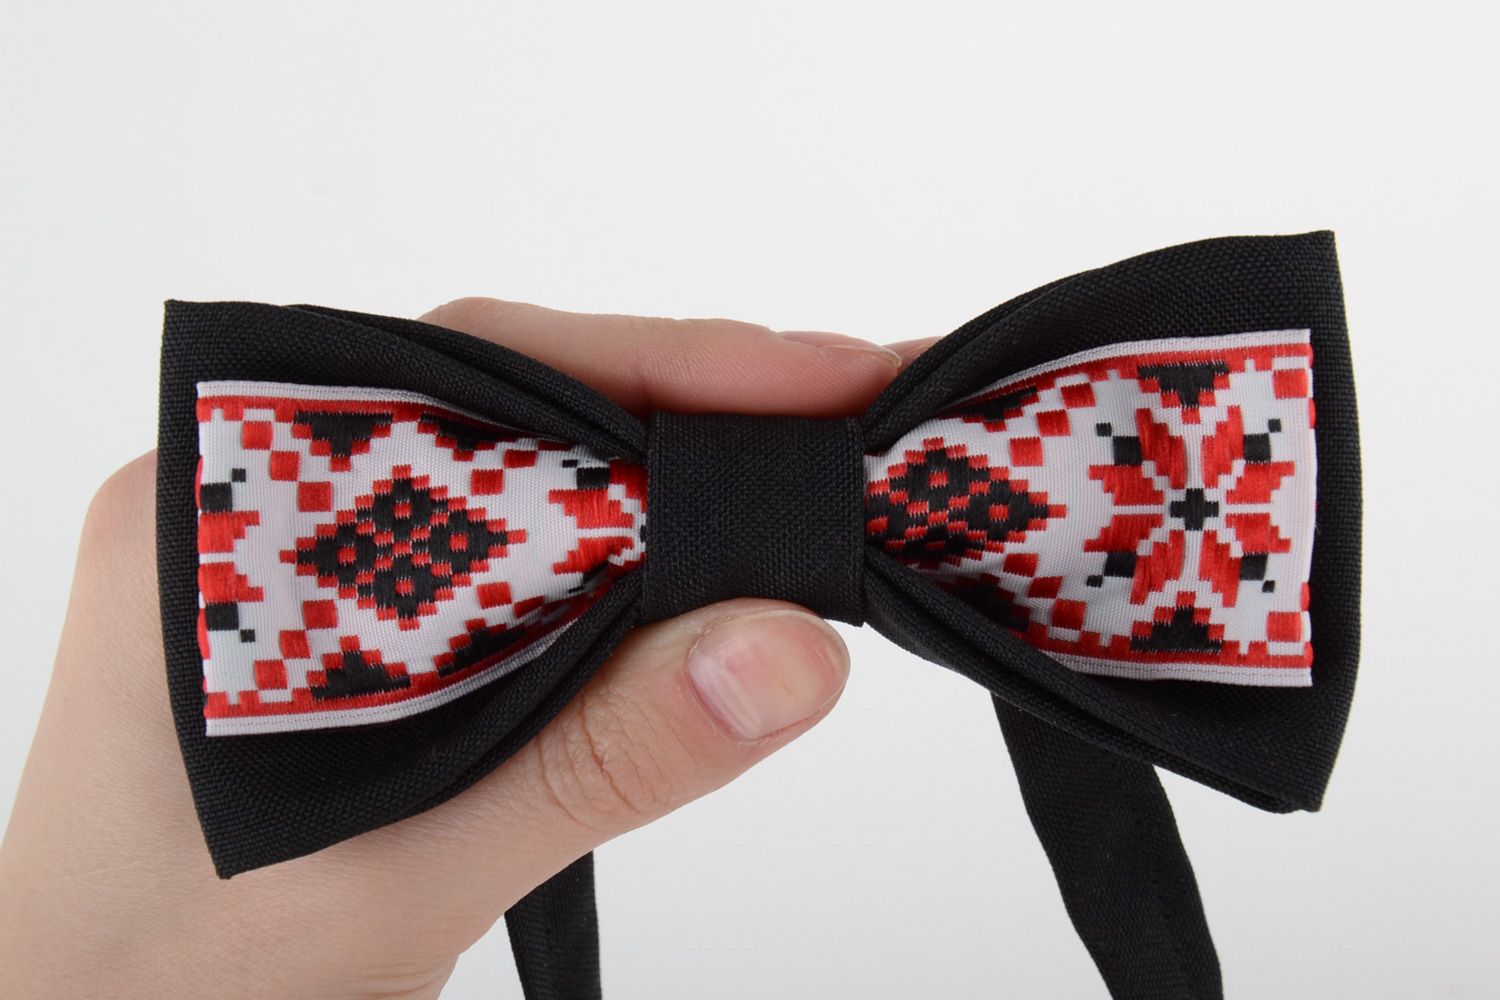 Handmade bow tie sewn of black and ornamented costume fabric in ethnic style photo 5